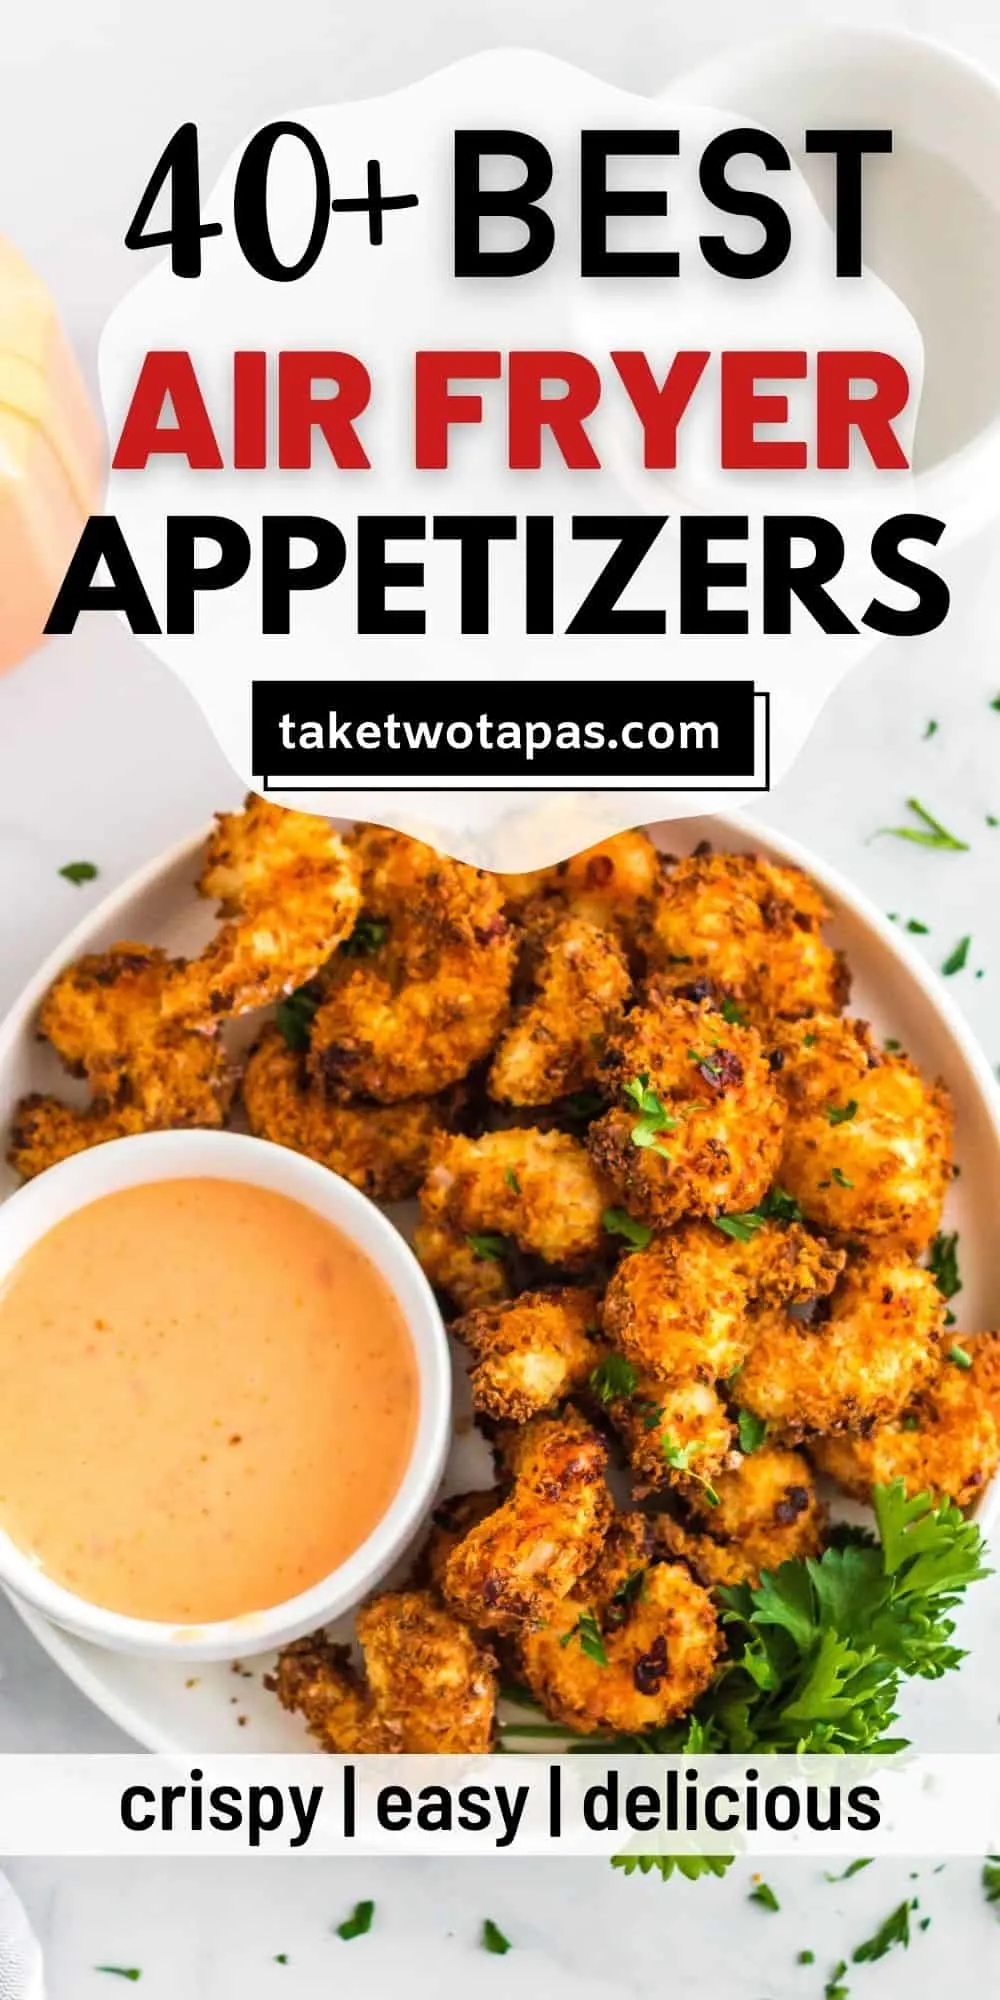 fried shrimp with text "40+ air fryer appetizer recipes"